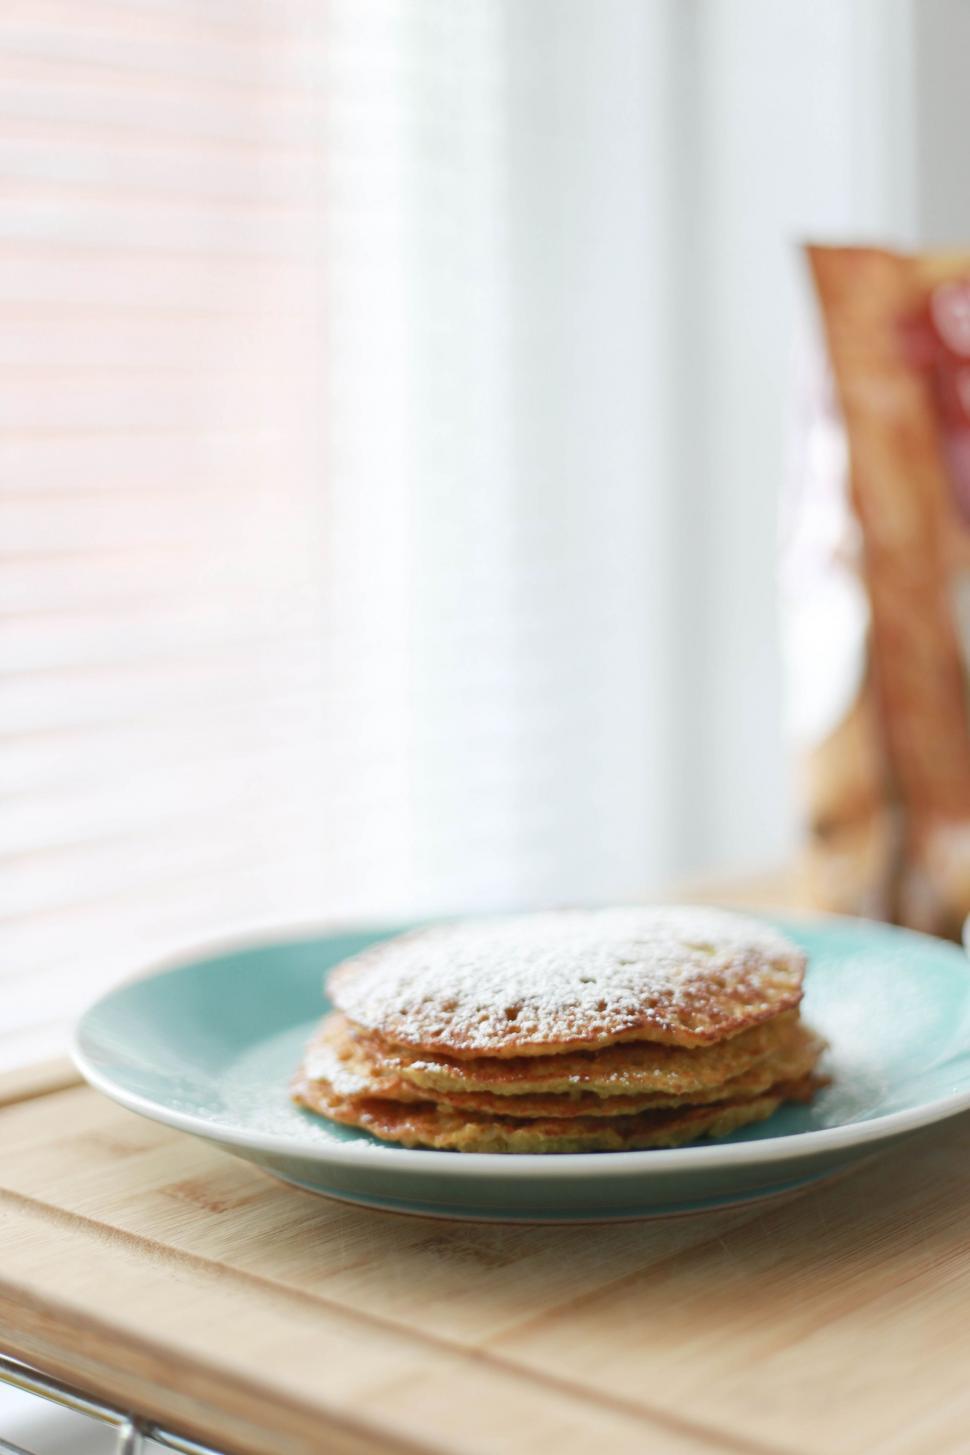 Free Image of Stack of Pancakes on Blue Plate 